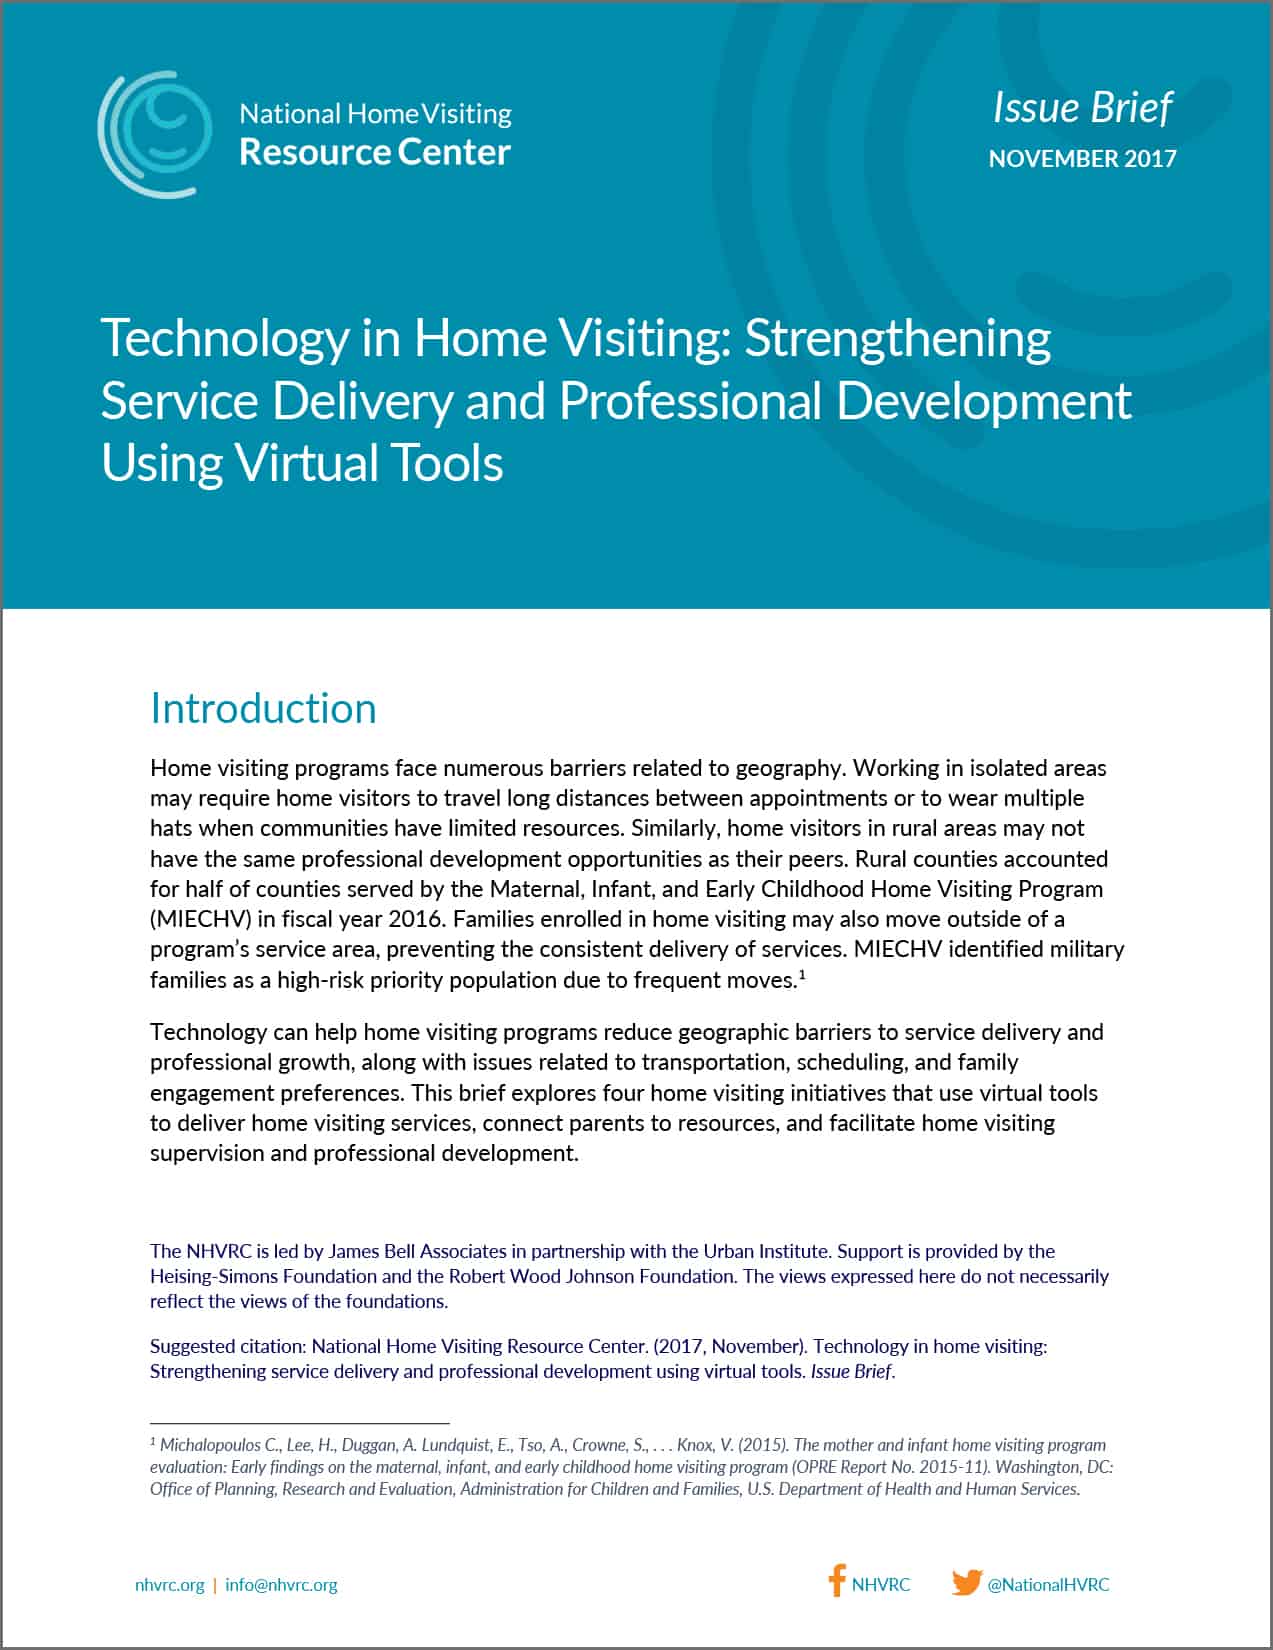 NHVRC Issue Brief, Technology in Home Visiting: Strengthening Service Delivery and Professional Development Using Virtual Tools